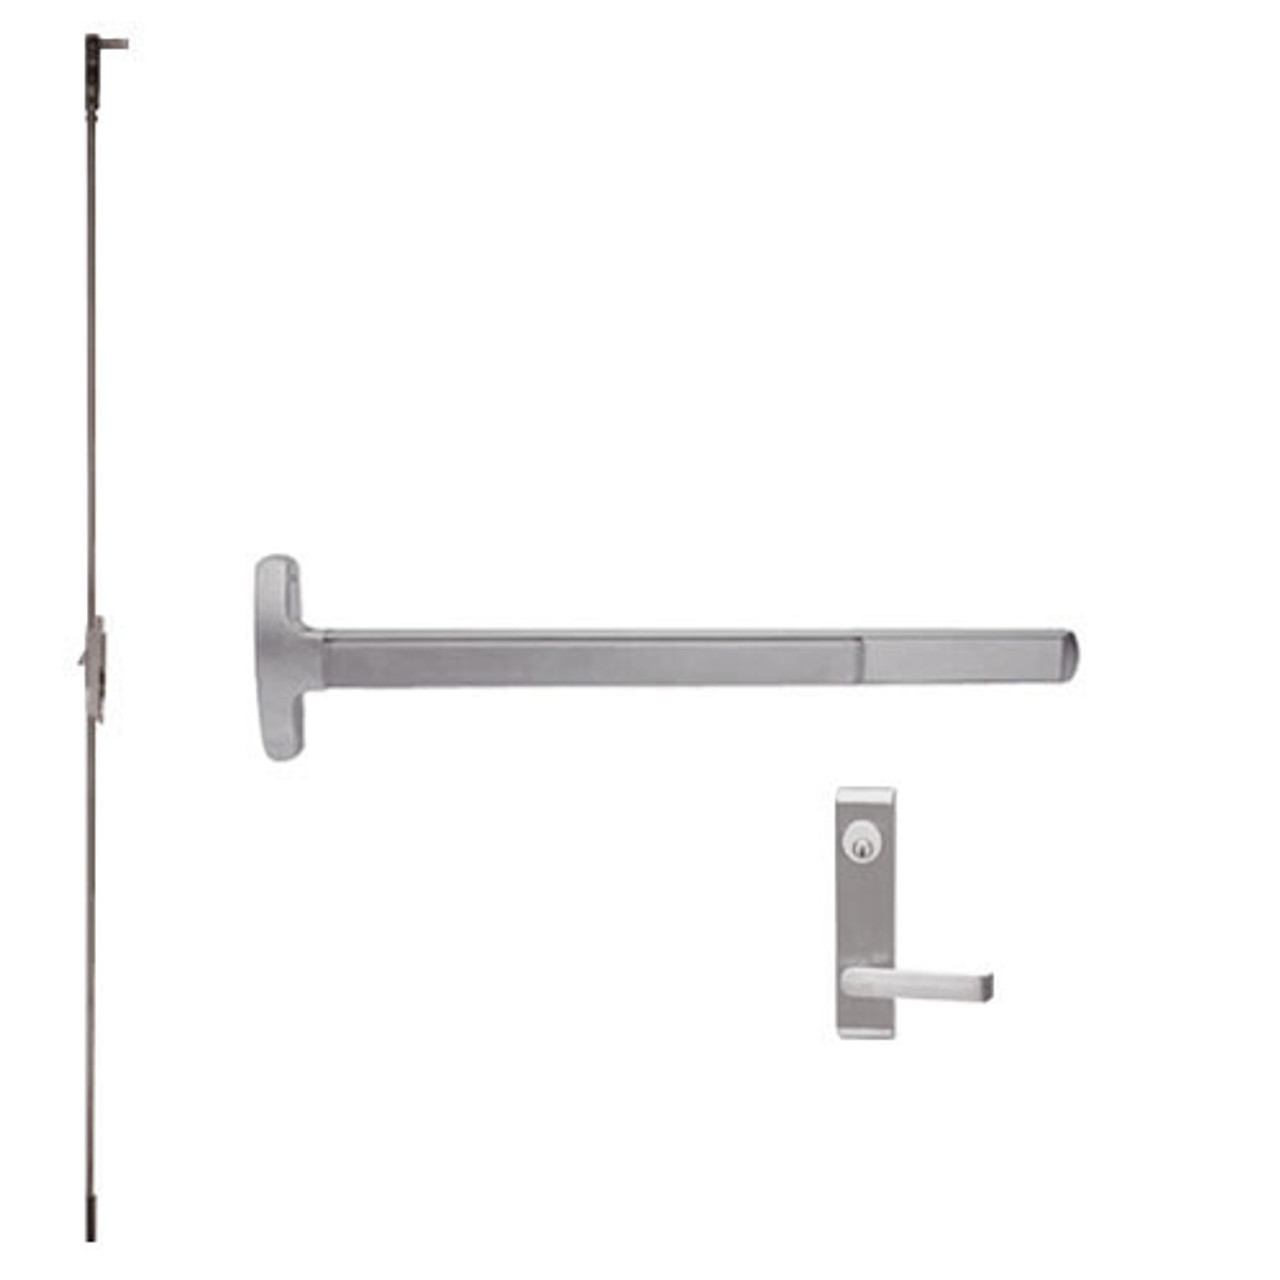 F-24-C-L-DANE-US32D-2-RHR Falcon Exit Device in Satin Stainless Steel